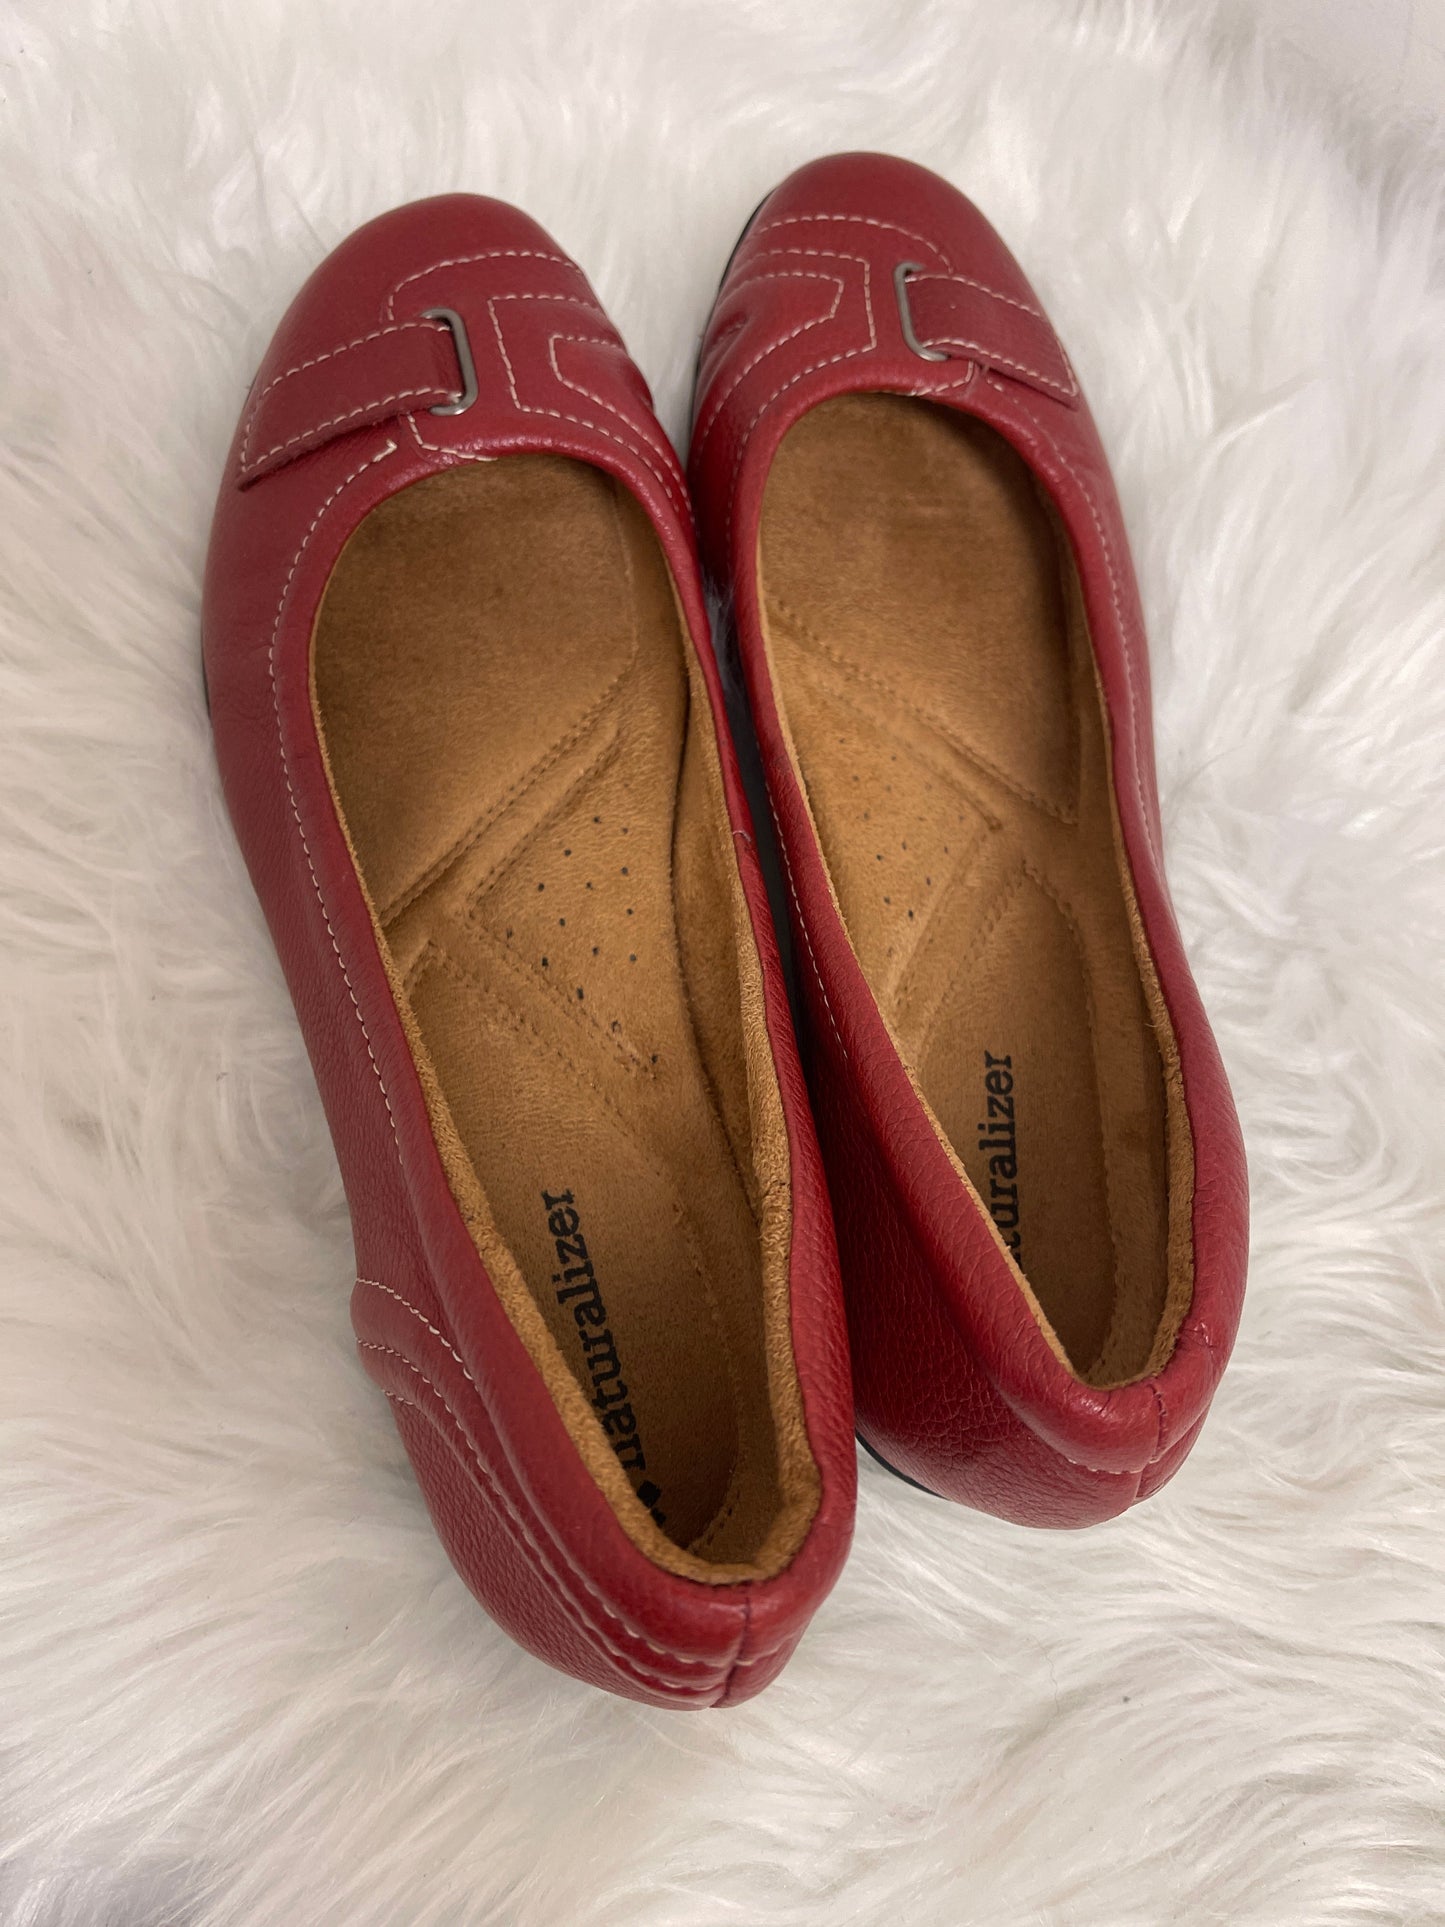 Red Shoes Flats Naturalizer, Size 8